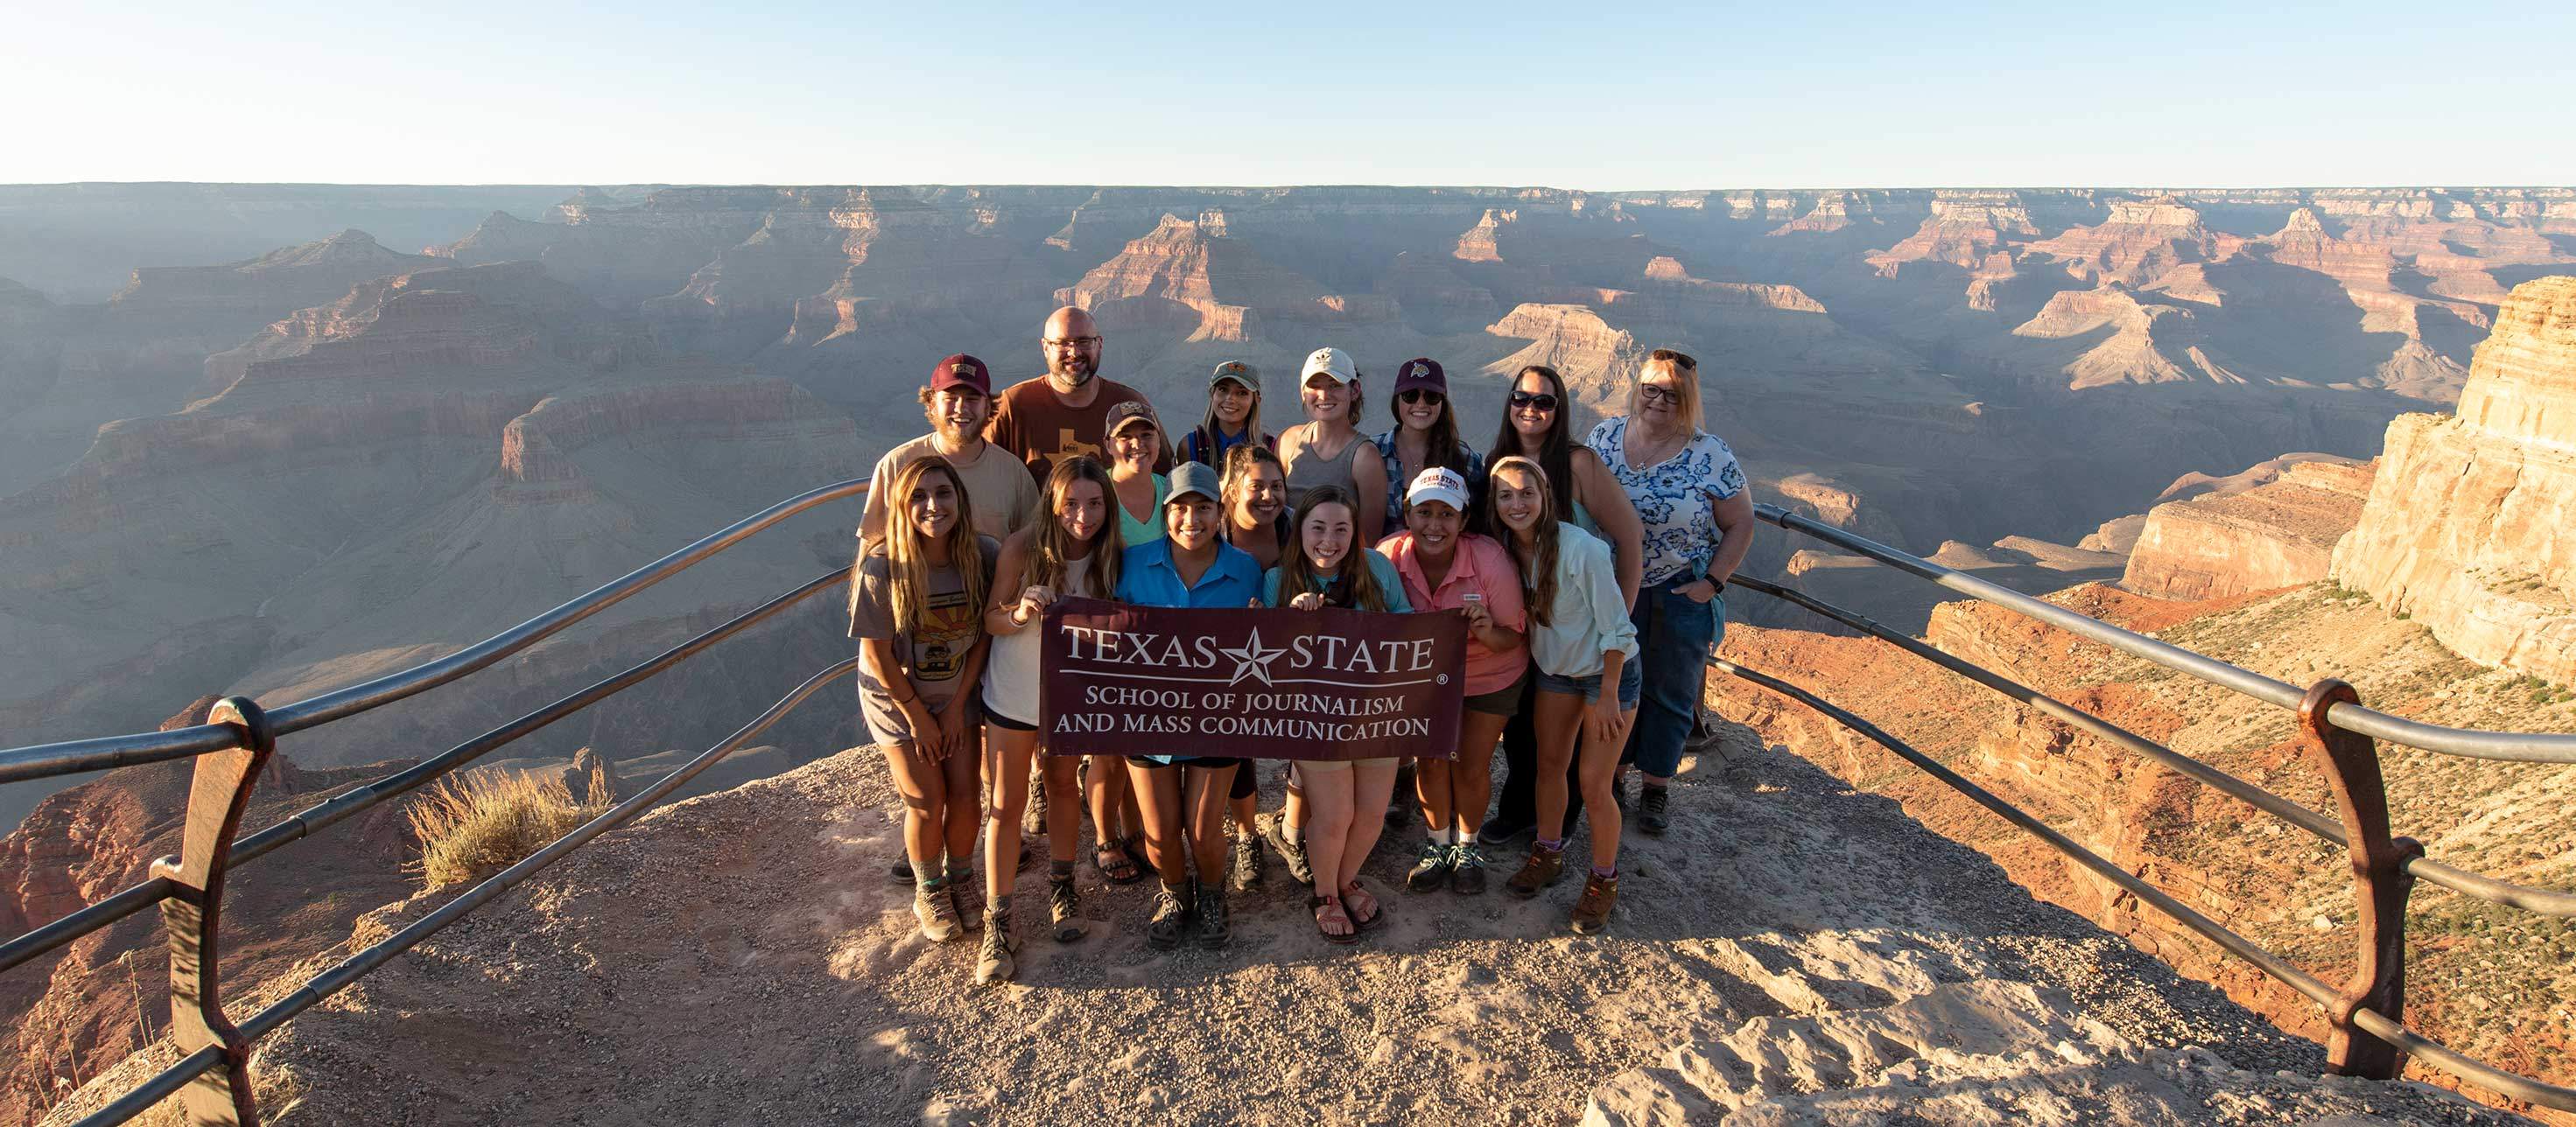 the mobile storytelling group takes a group photo in front of the grand canyon